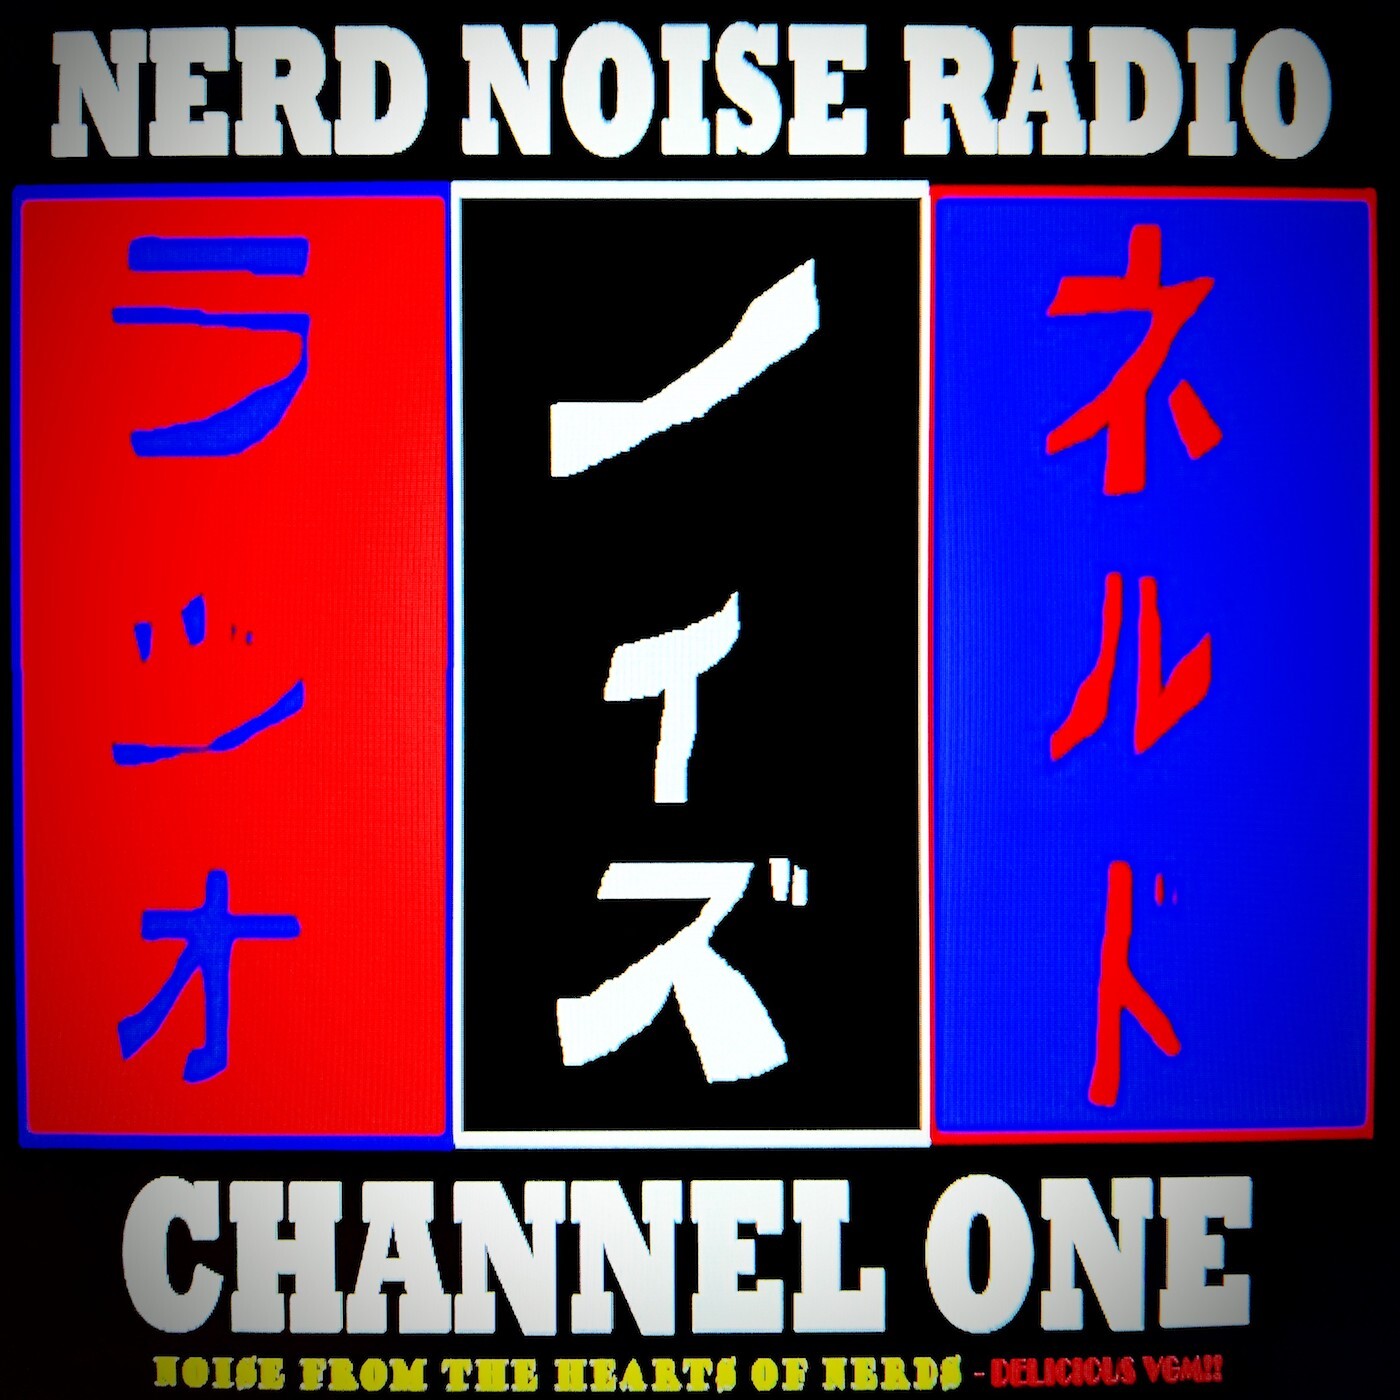 Nerd Noise Radio - Channel 1: ”Noise from the Hearts of Nerds” Podcast  - “C1E31: Streets of Rage 2 Soundtrack”